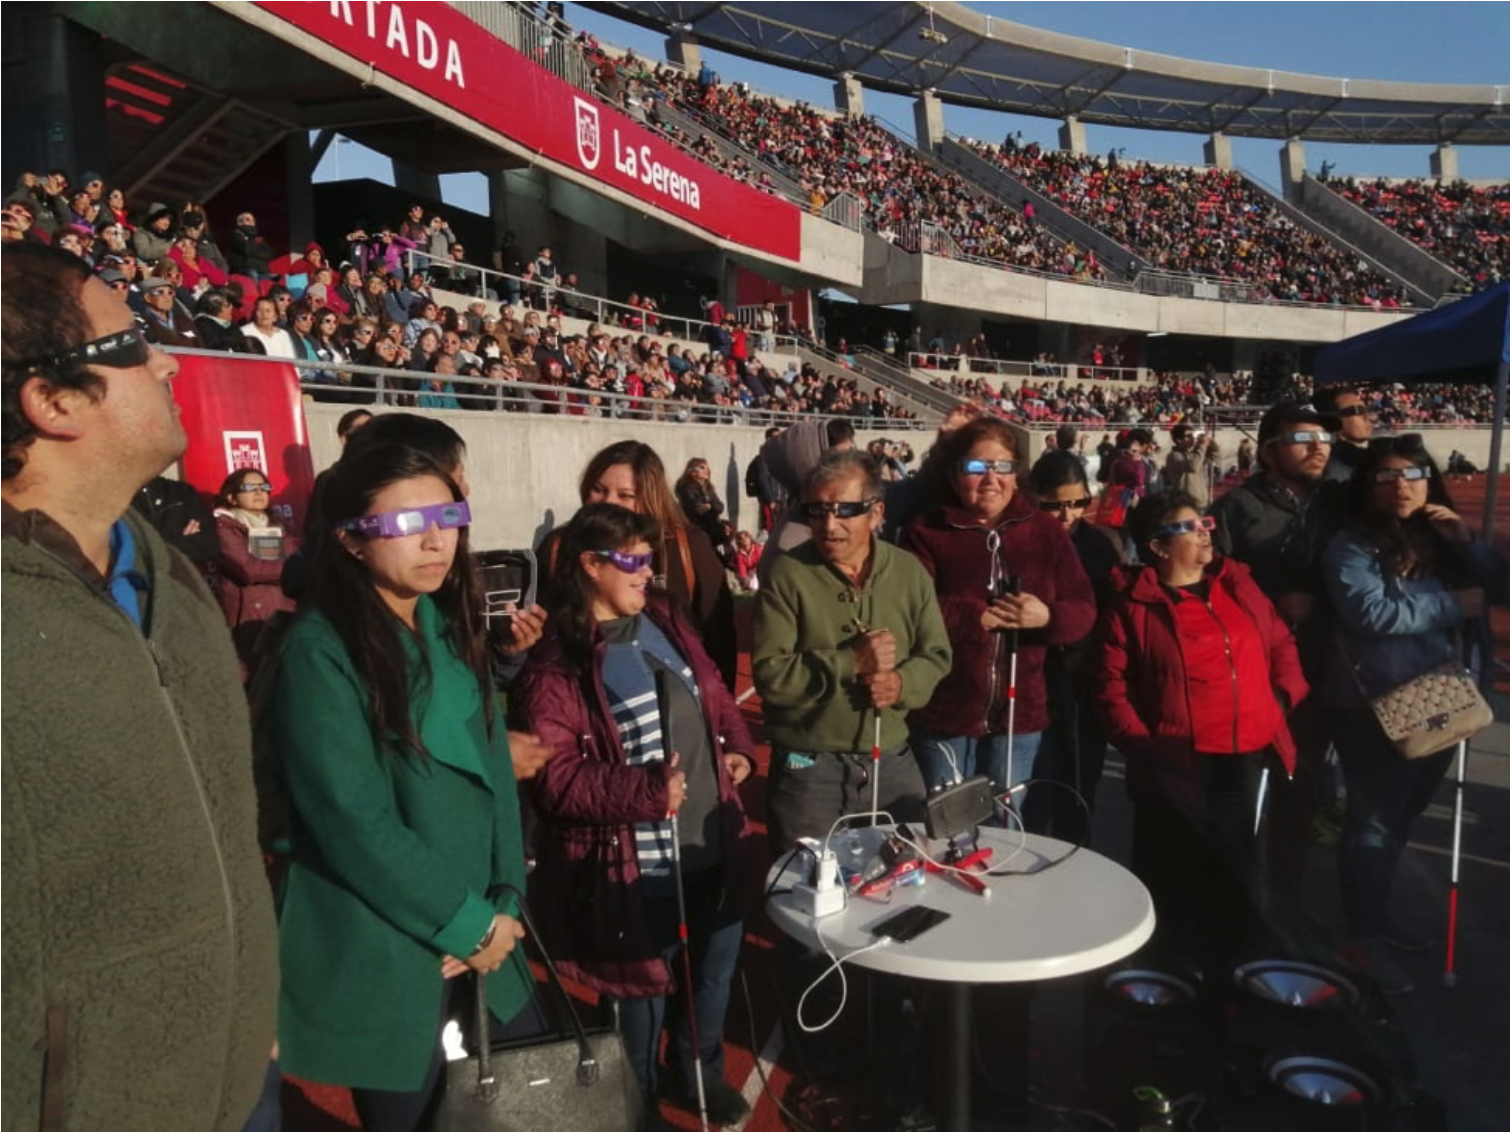 Thousands of people gathered at La Portada Stadium in La Serena, Chile during the 2 July 2019 solar eclipse. A LightSound device is positioned on a table and connected to a large speaker to project the sound to the crowd.